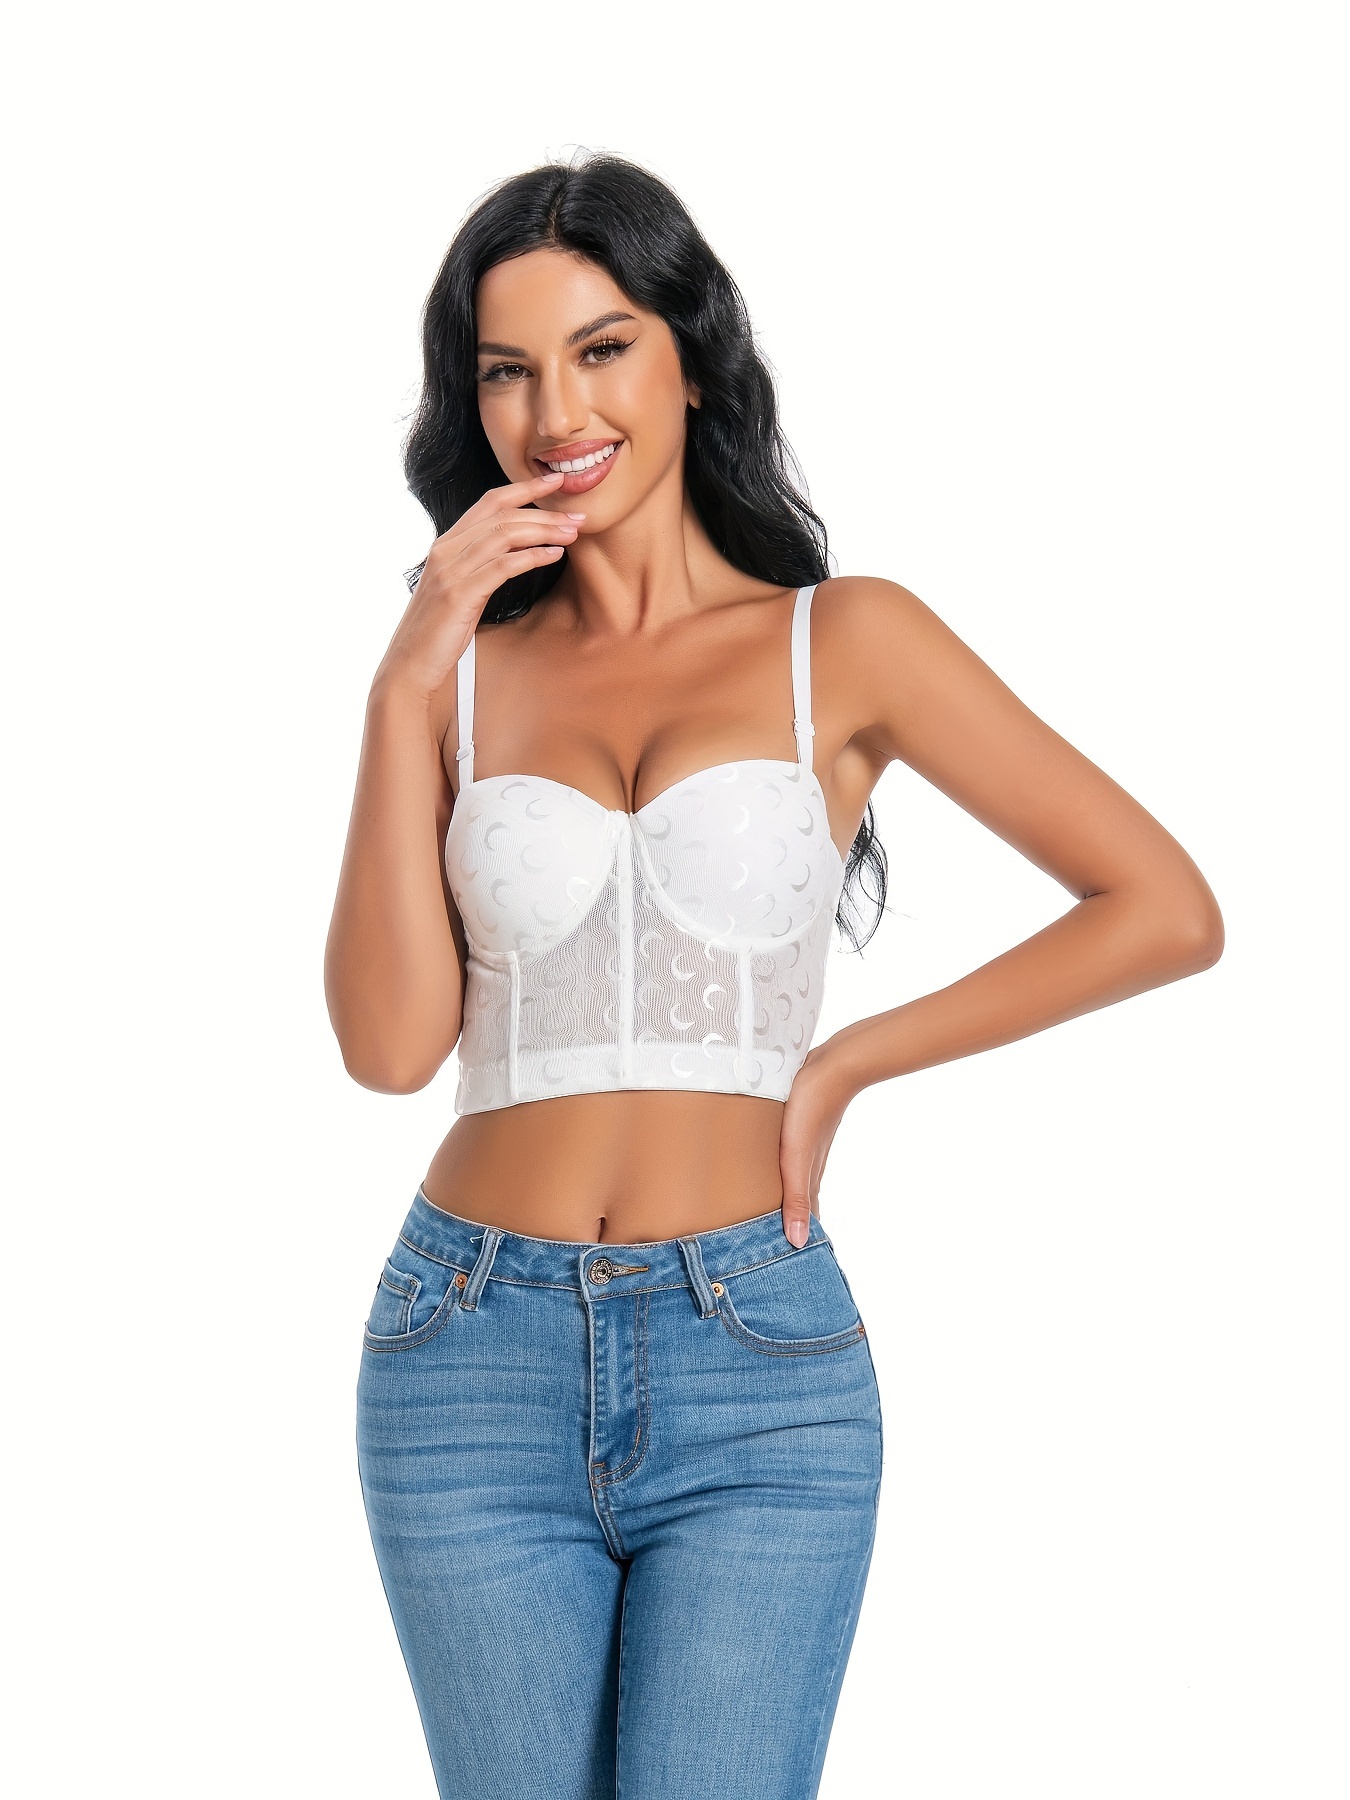 Crystal Letter Slim Comfy Corset Bra Set For Women Soft, Tempting, And  Comfortable Intimate Sling Underwear For Home And Office From Secondmoon,  $18.32